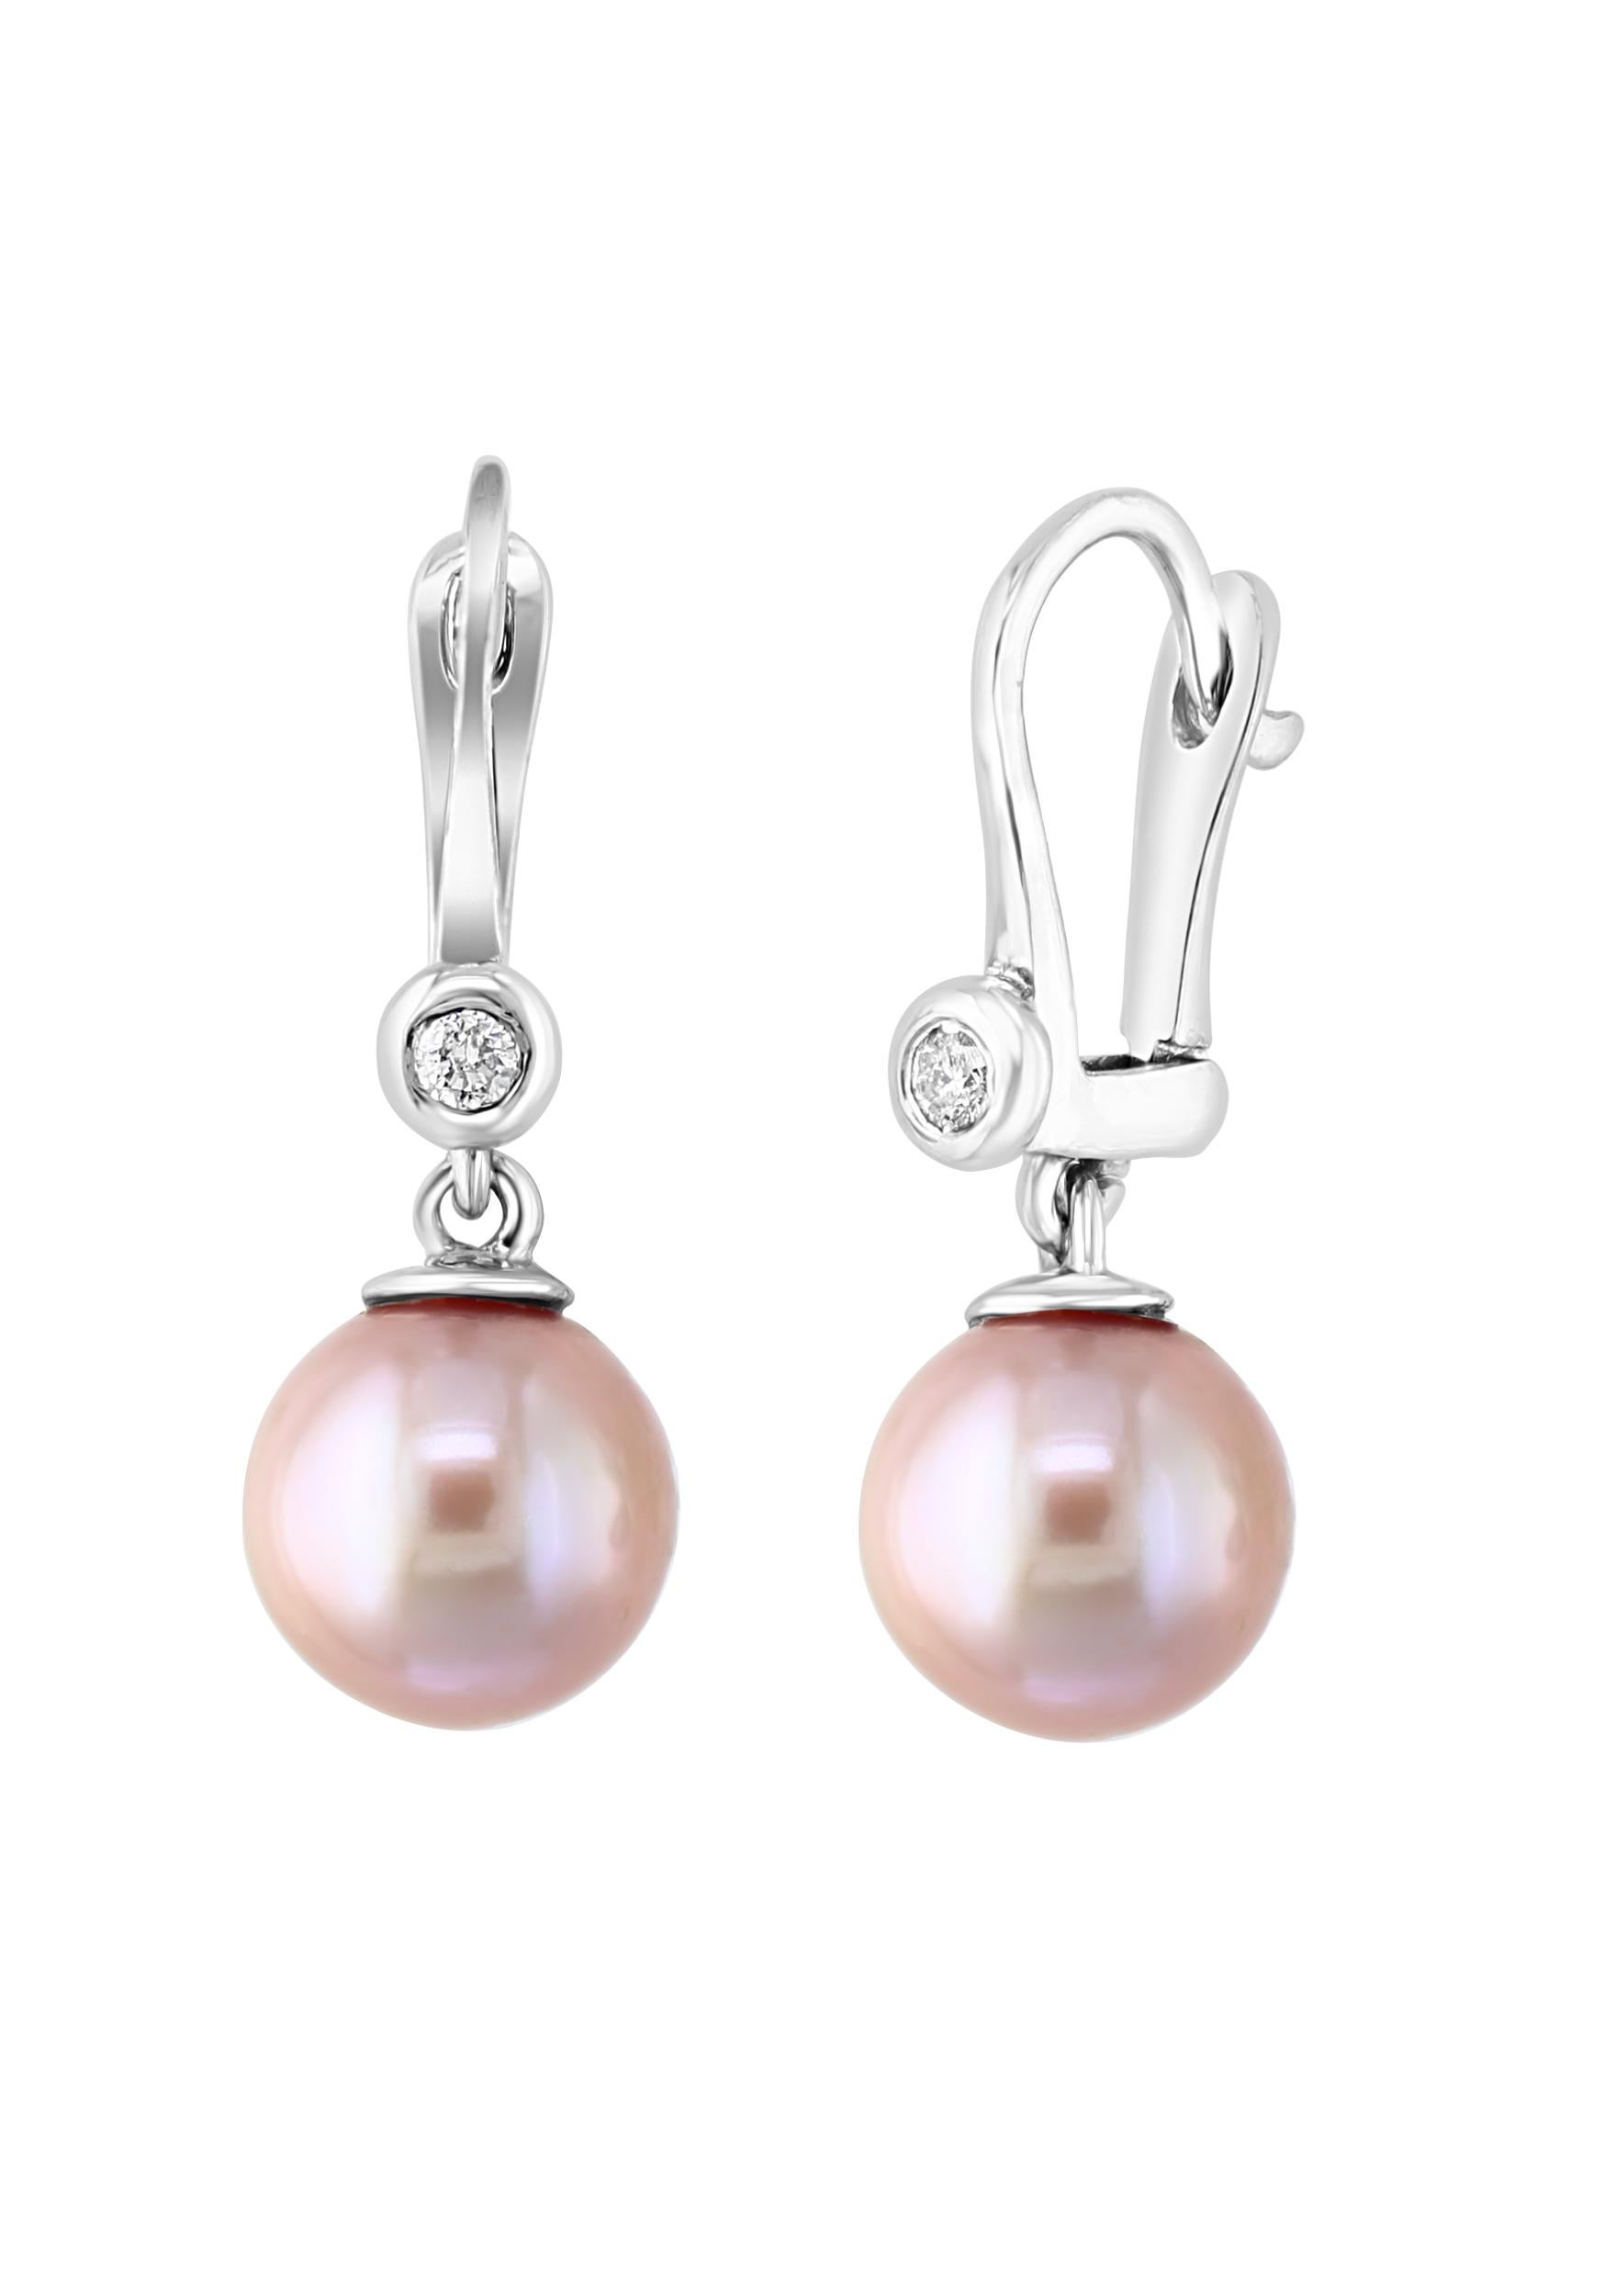 These 14 karat white gold lever-back earrings feature Chinese freshwater, natural color pink round pearls measuring 8-8.5mm sitting beneath 0.06 carats of diamonds. 
EXQUISITELY ELEGANT – New to our Amazon collection, this sophisticated jewelry